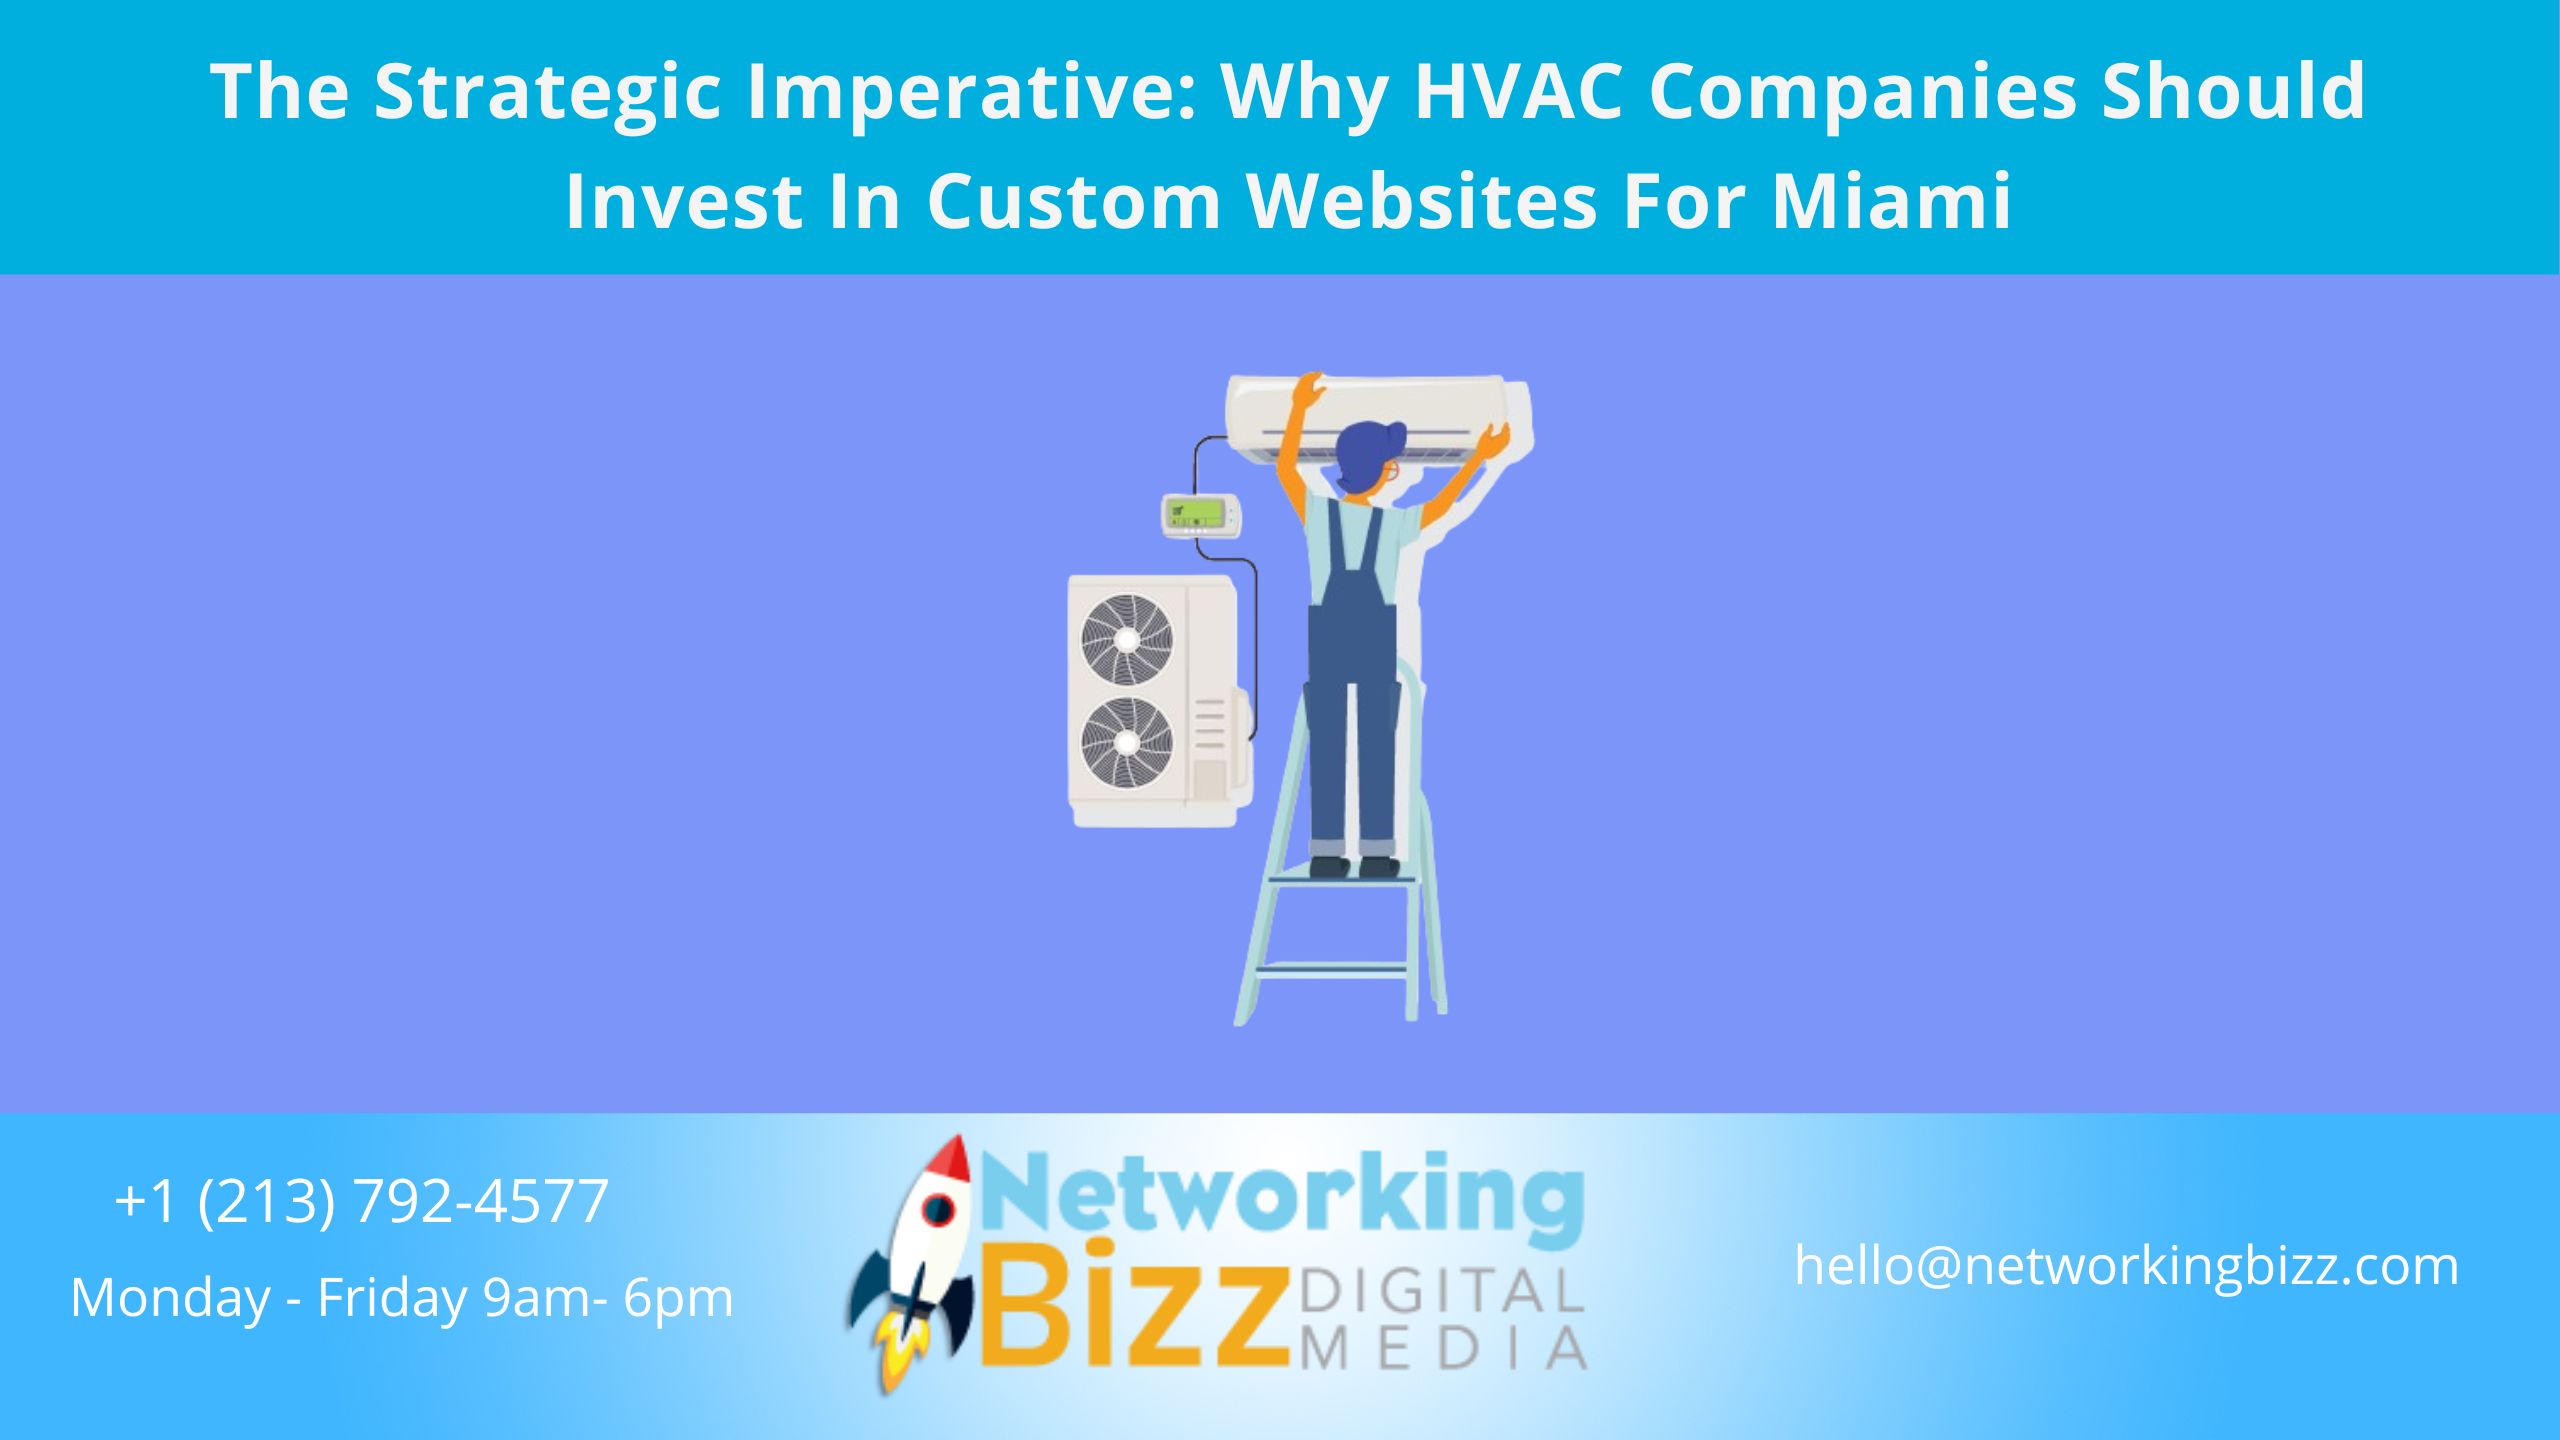 The Strategic Imperative: Why HVAC Companies Should Invest In Custom Websites For Miami